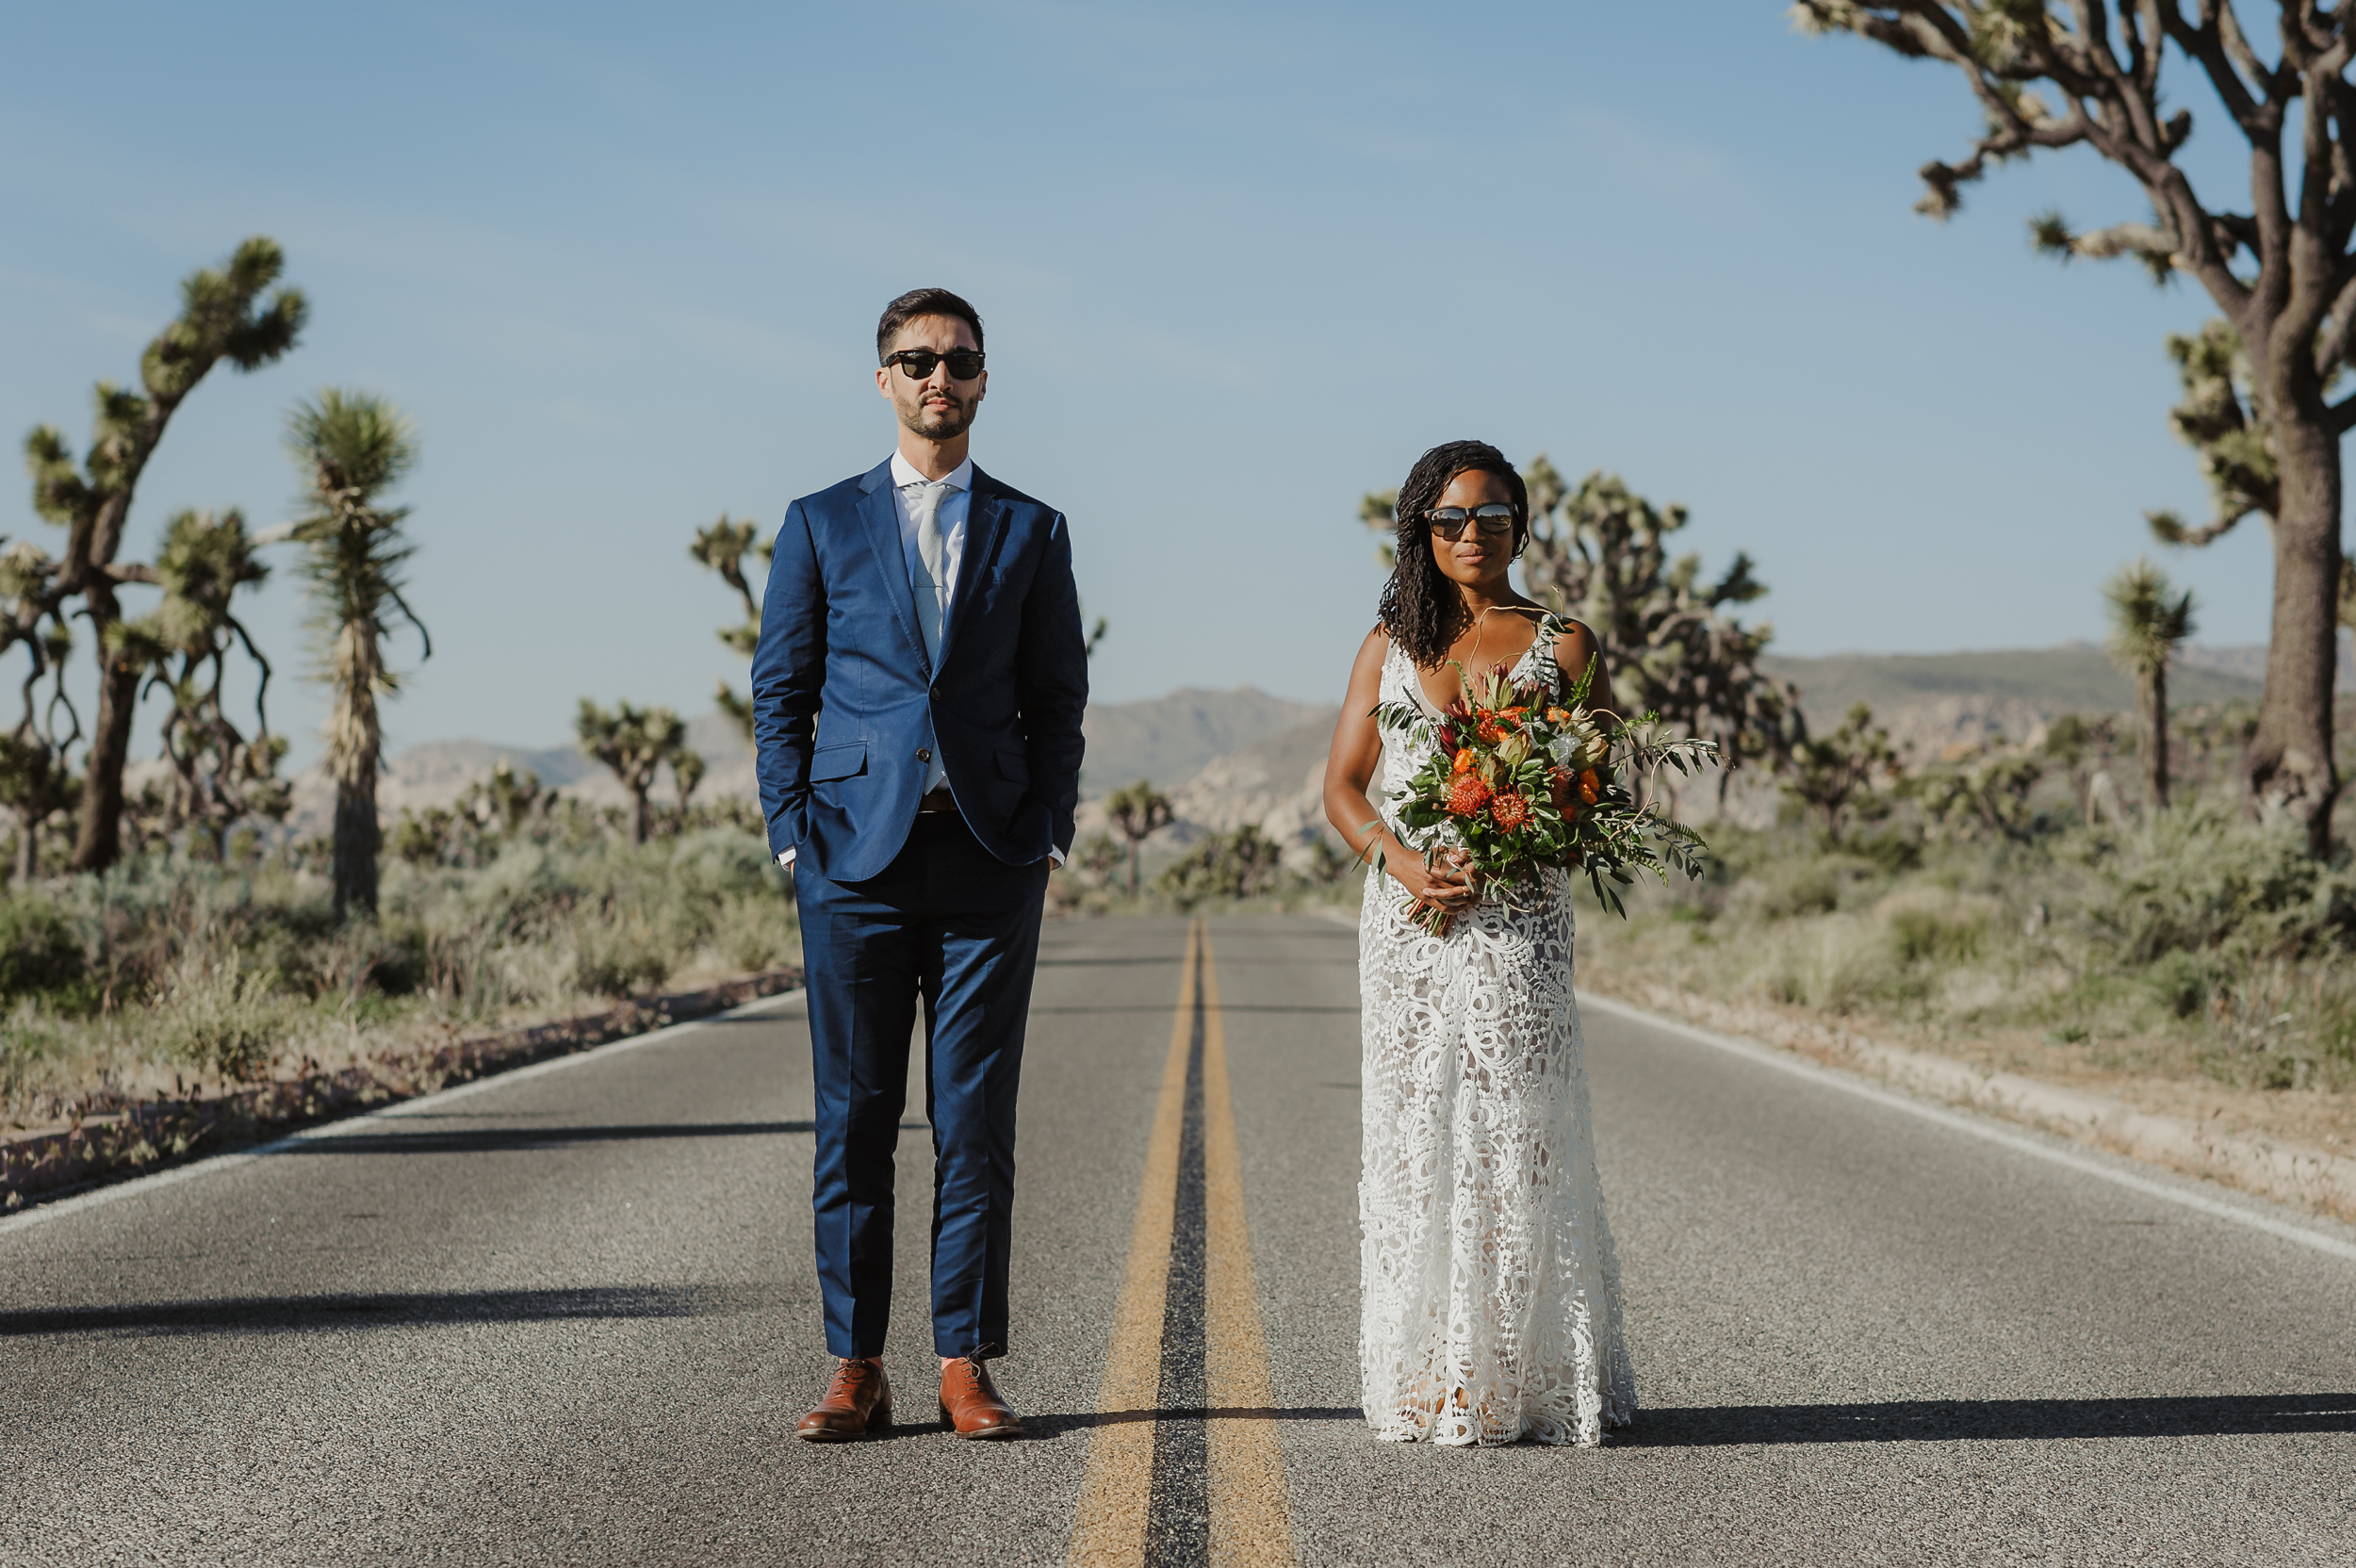 Groom in a blue suit and bride in a lace dress stand in the middle of a deserted highway in Joshua Tree